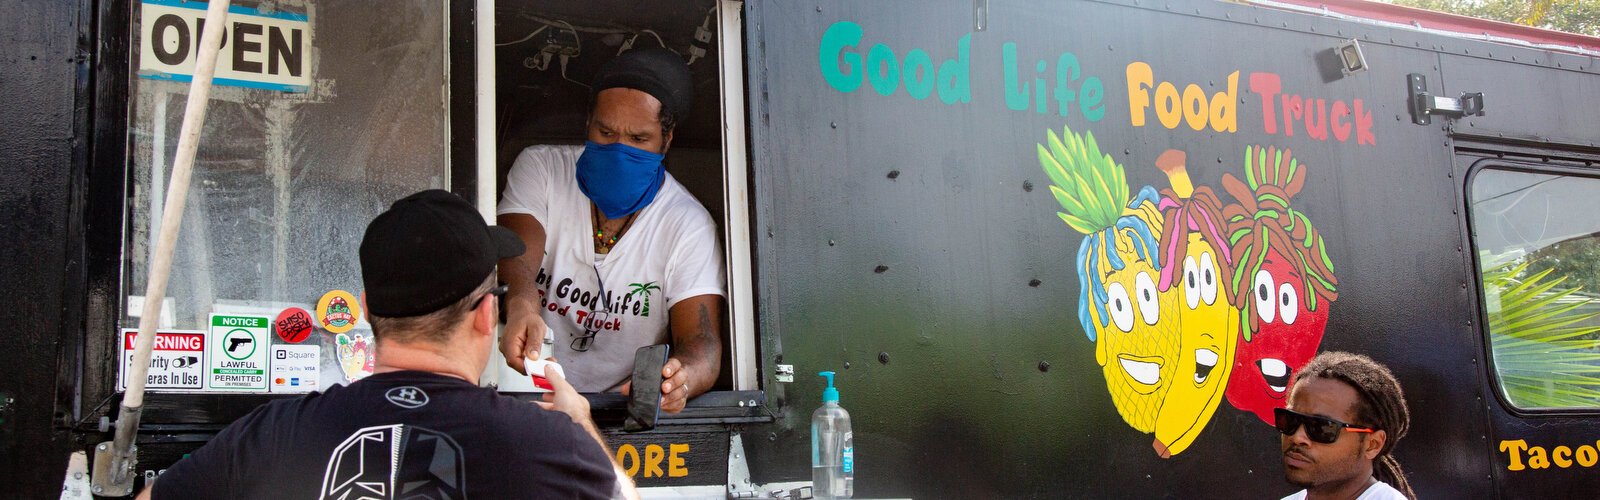 The Good Life Food Truck offers healthy treats using turmeric, ginger, sea moss, maca, flax seed and other super foods in their smoothies, juices, and vegan fare at the Downtown Dunedin Vegan Food Truck Rally & Market in August 2021.